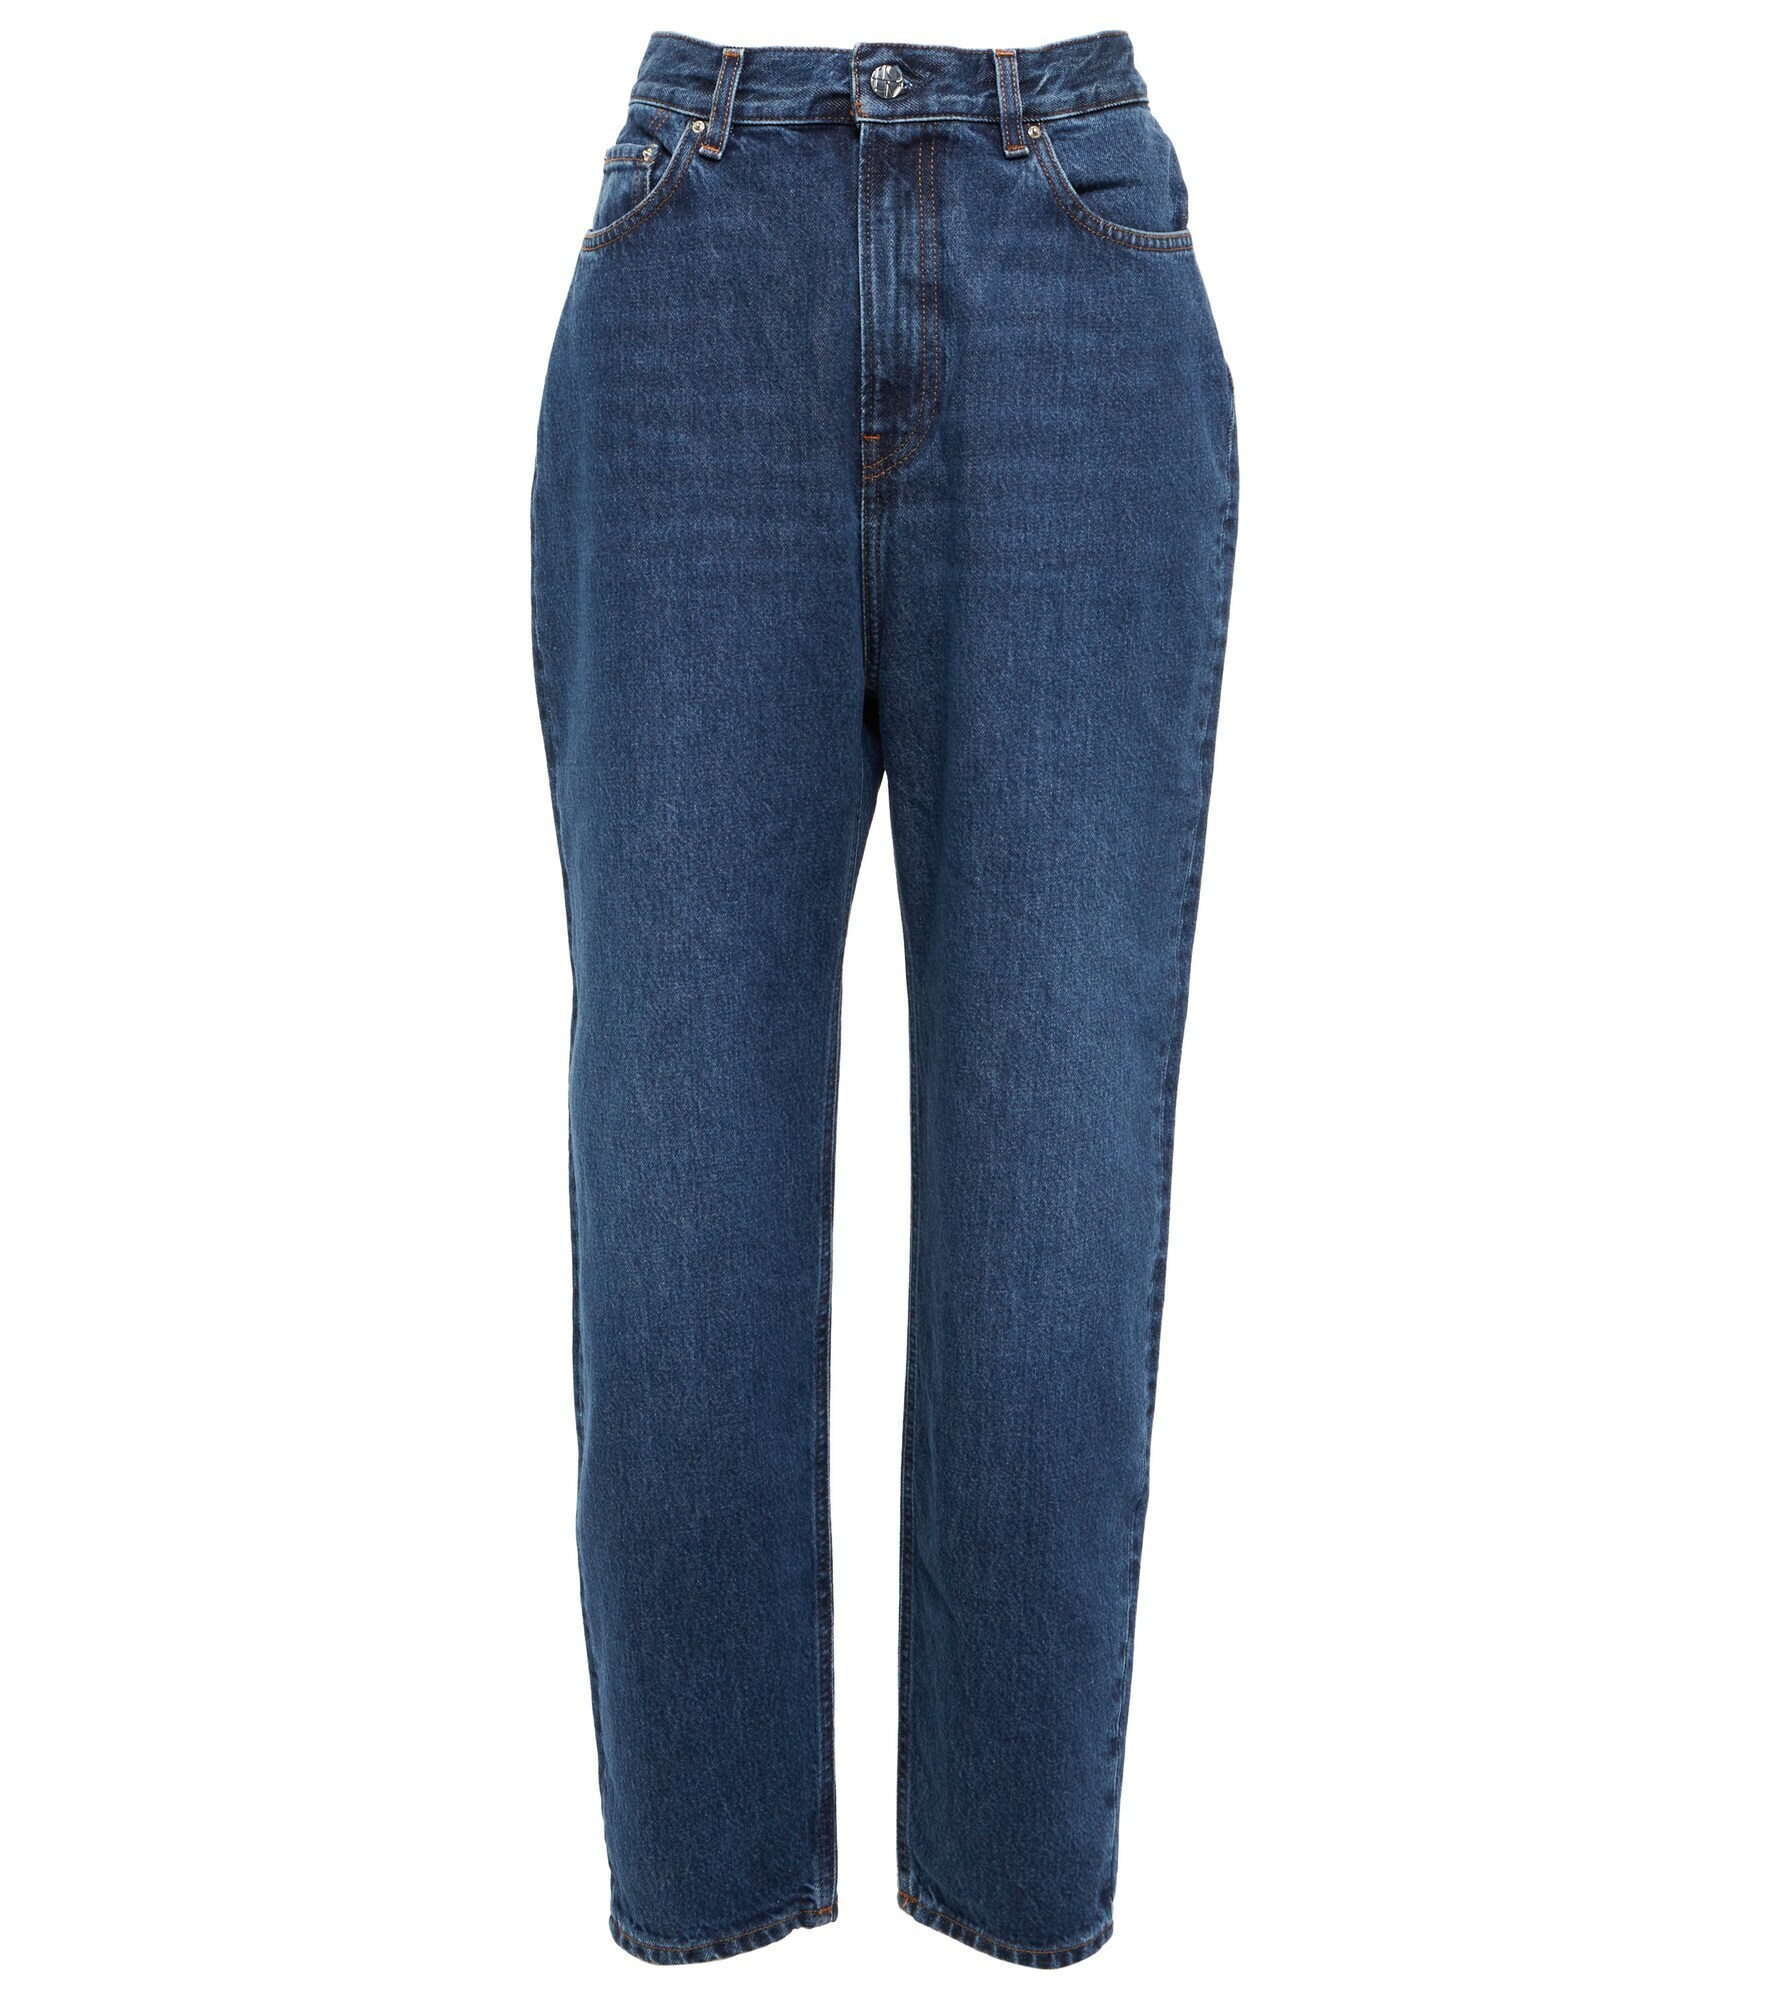 Toteme - High-rise tapered jeans Toteme